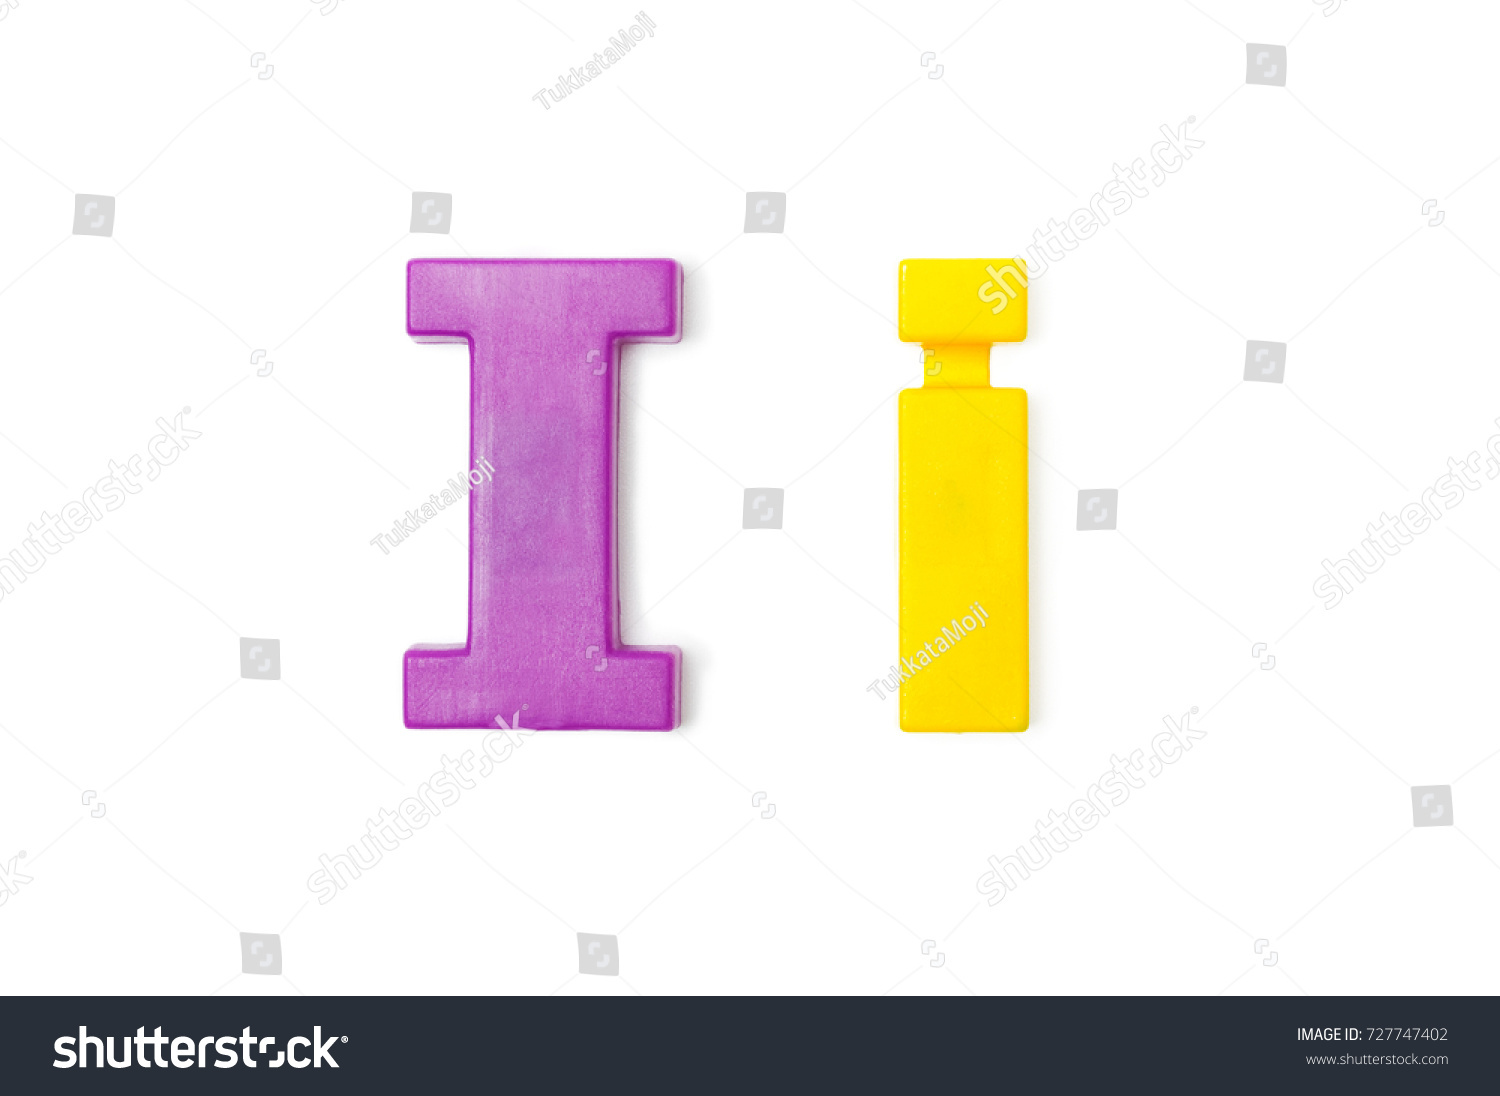 English Plastic Letter " I and i ". Capital Letter and Small Letter on white background. Top view. #727747402